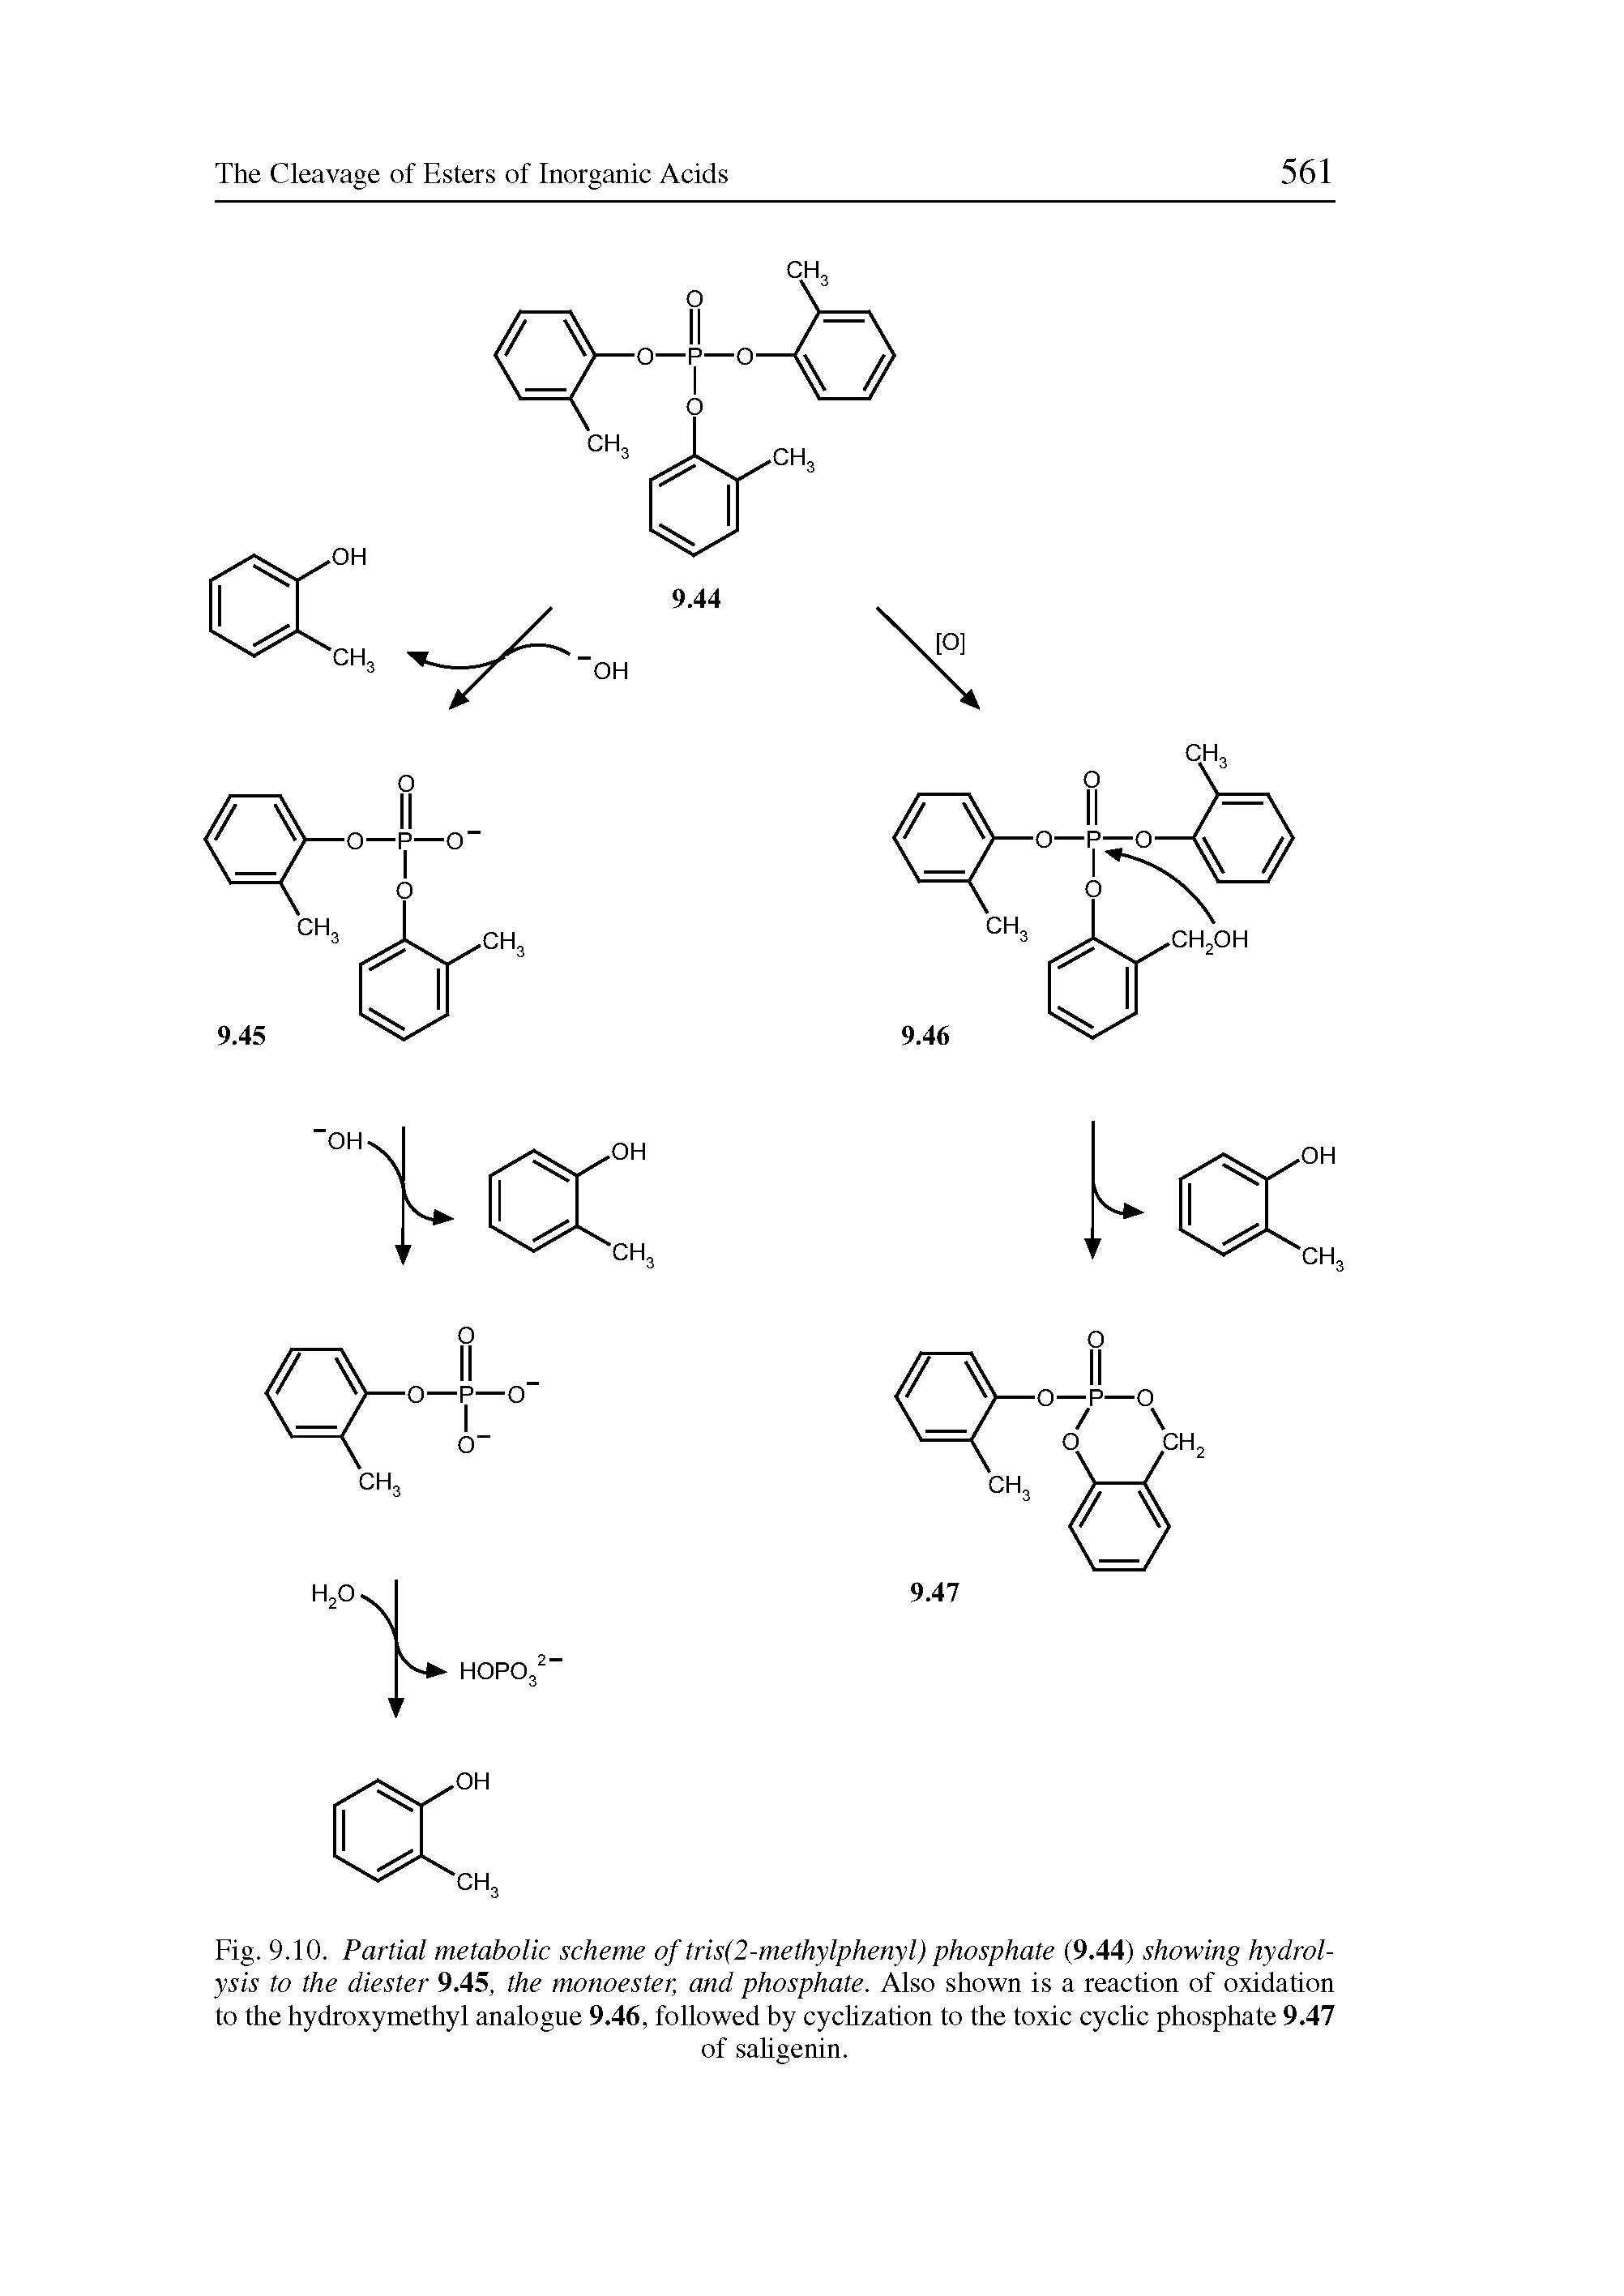 Fig. 9.10. Partial metabolic scheme of tris(2-methylphenyl) phosphate (9.44) showing hydrolysis to the diester 9.45, the monoester, and phosphate. Also shown is a reaction of oxidation to the hydroxymethyl analogue 9.46, followed by cyclization to the toxic cyclic phosphate 9.47...